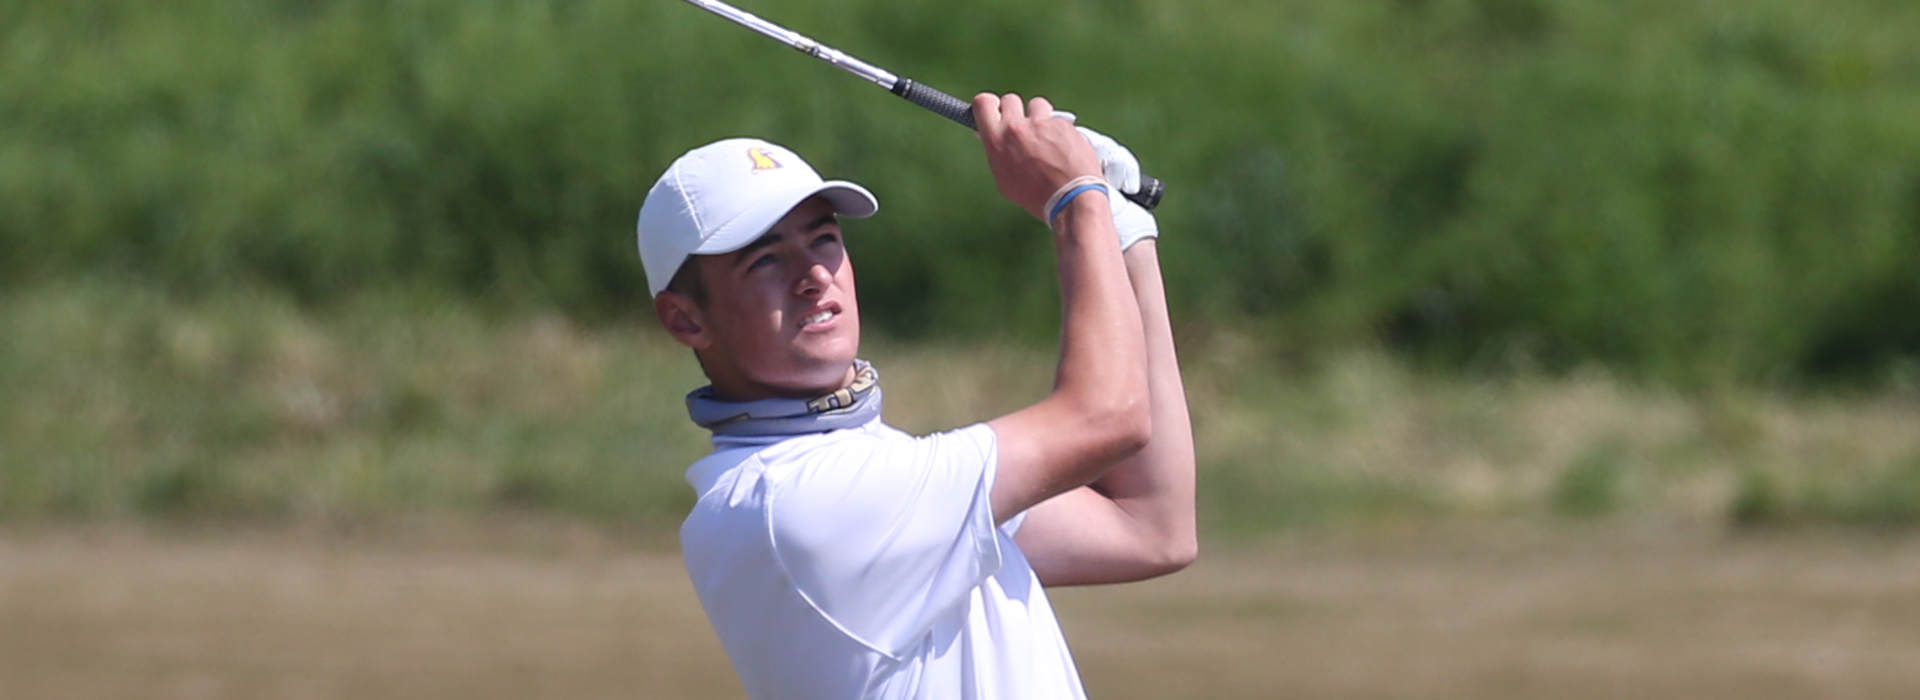 Tech men's golf team off to fast start at OVC Championships, third after day one